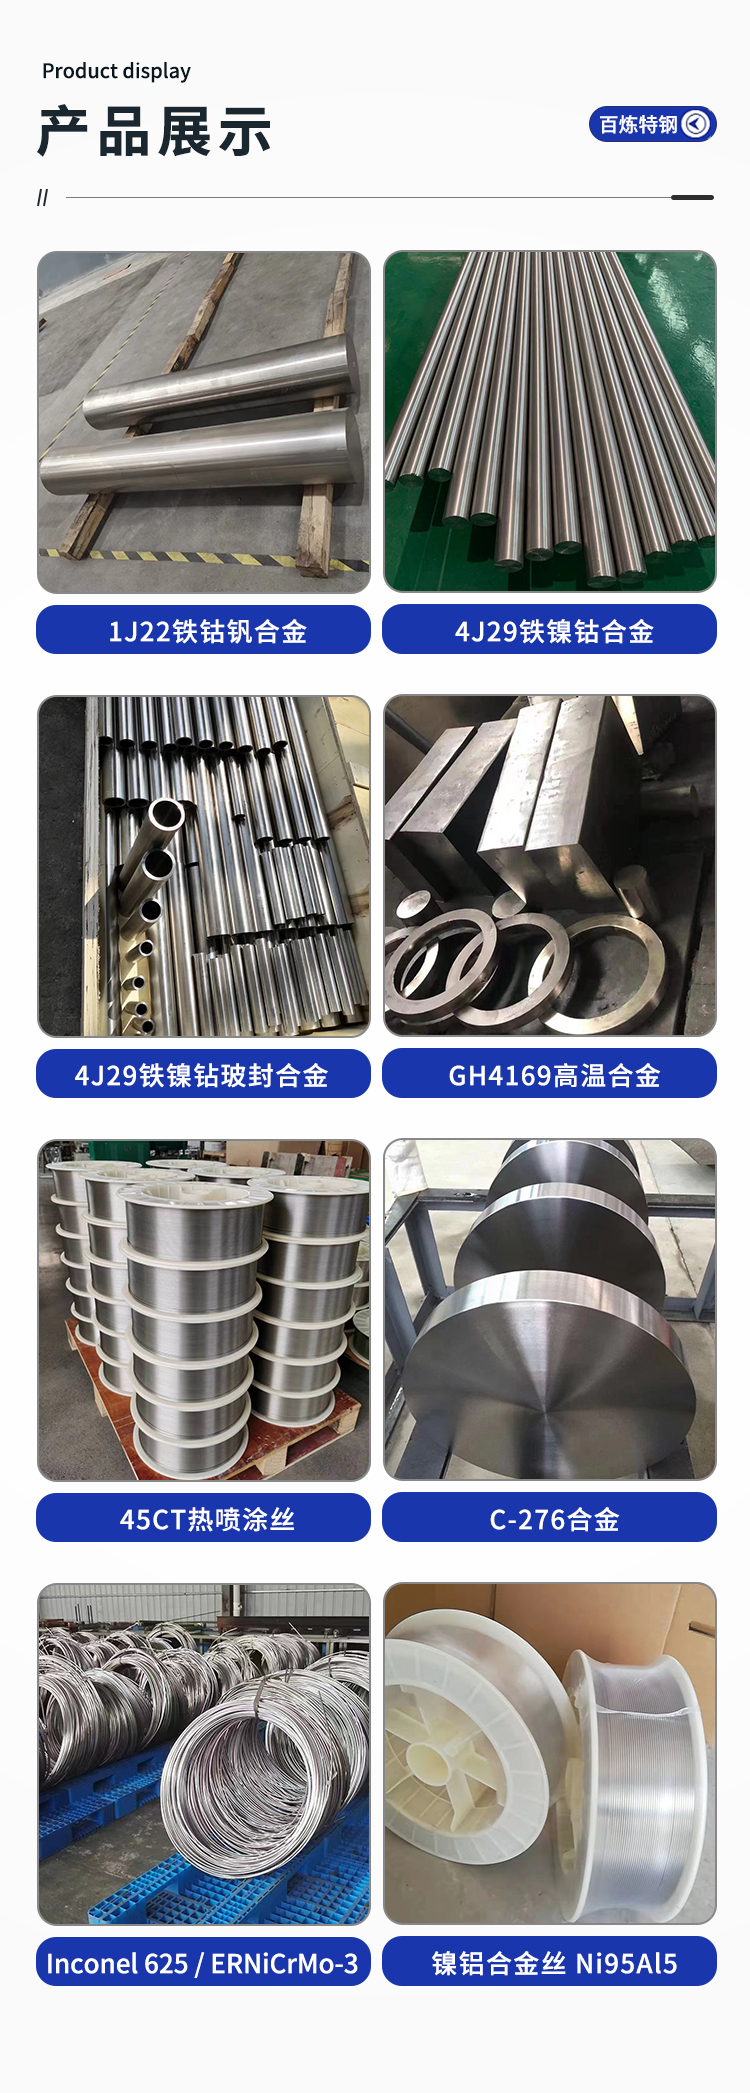 Bailian Special Steel Nickel Cobalt Alloy 4J29 Strip, Bar, Plate, and Pipe Can be Customized